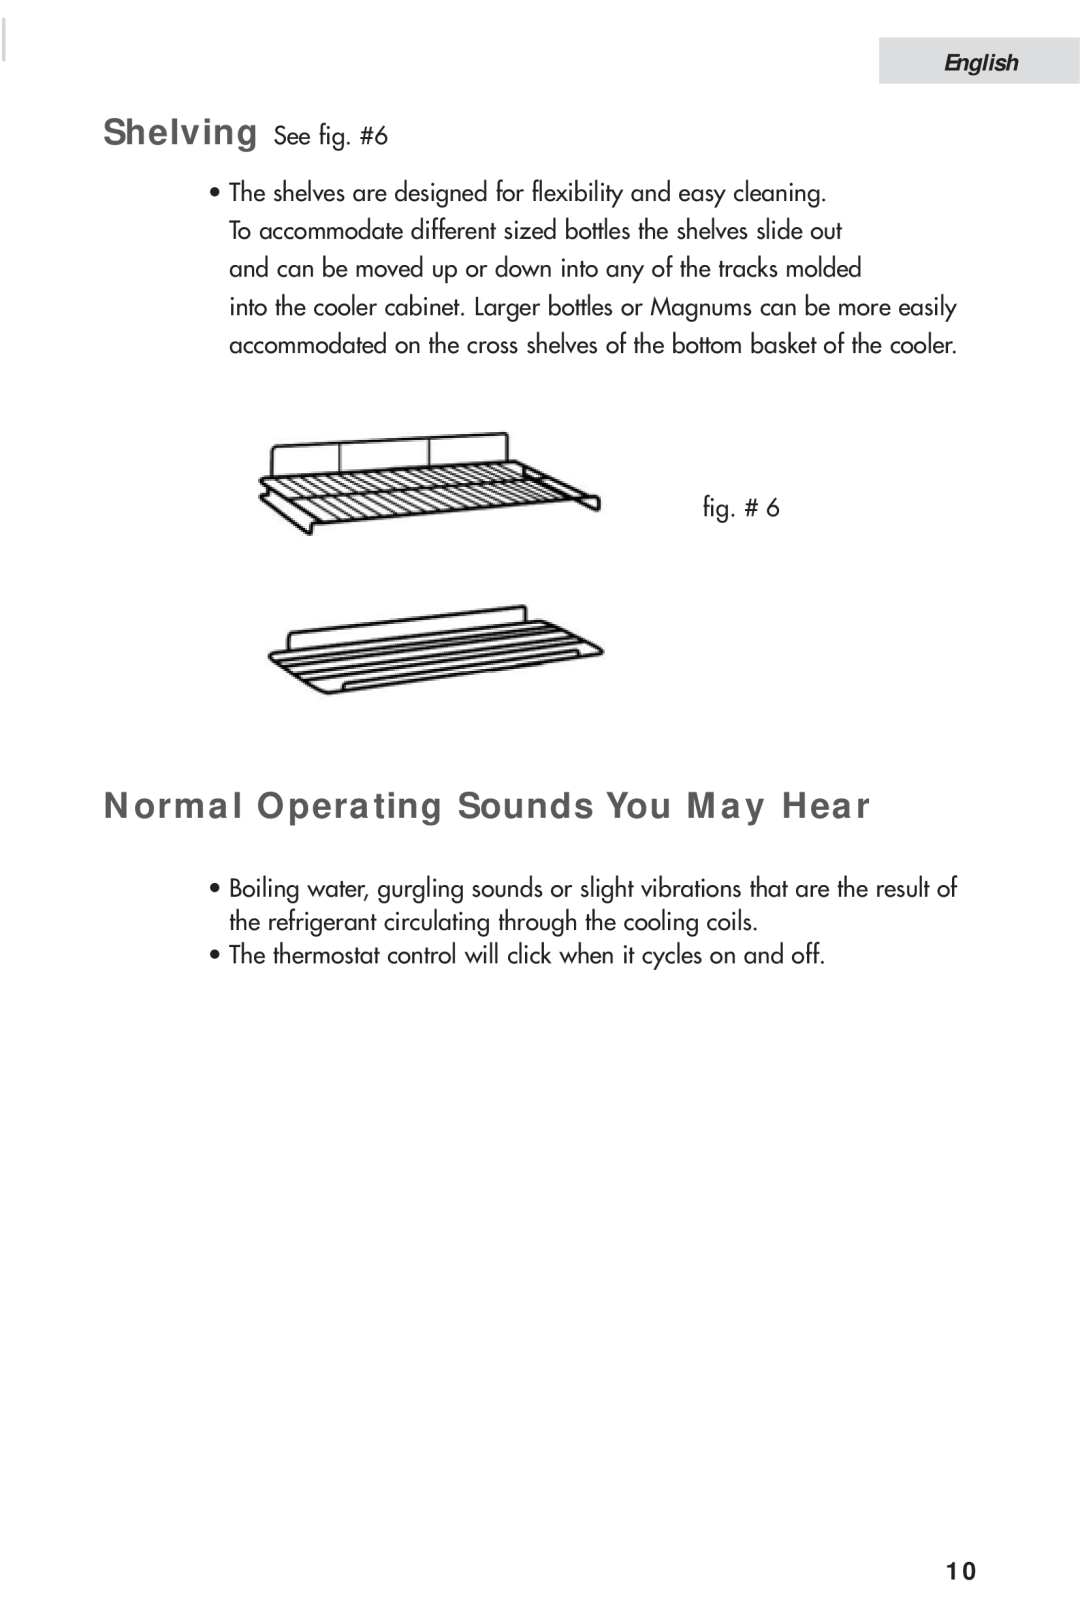 Haier HVH014A manual Normal Operating Sounds You May Hear, English 